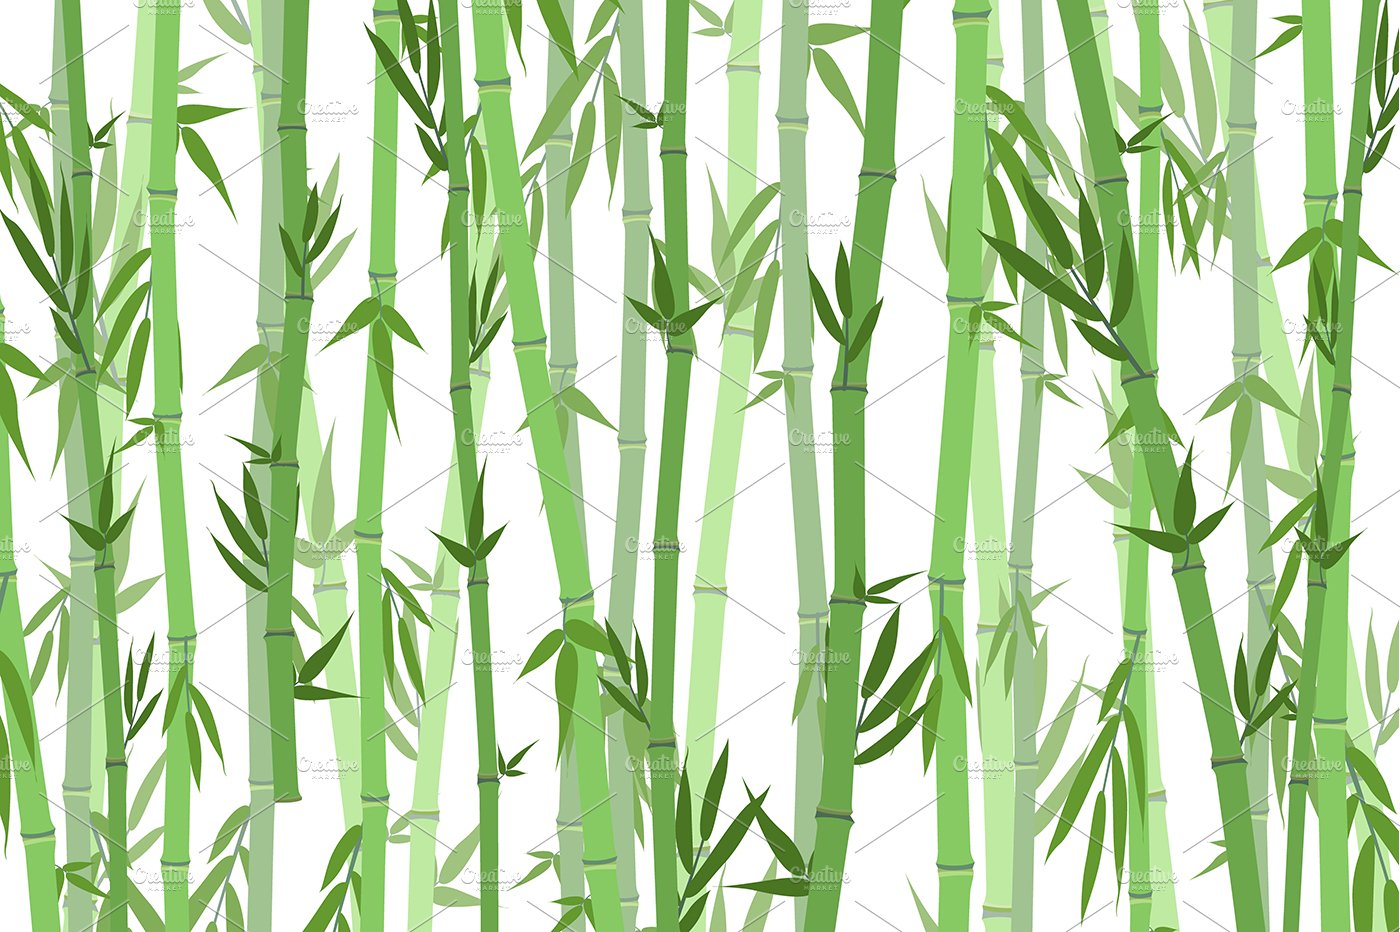 Pattern of green bamboo leaves.